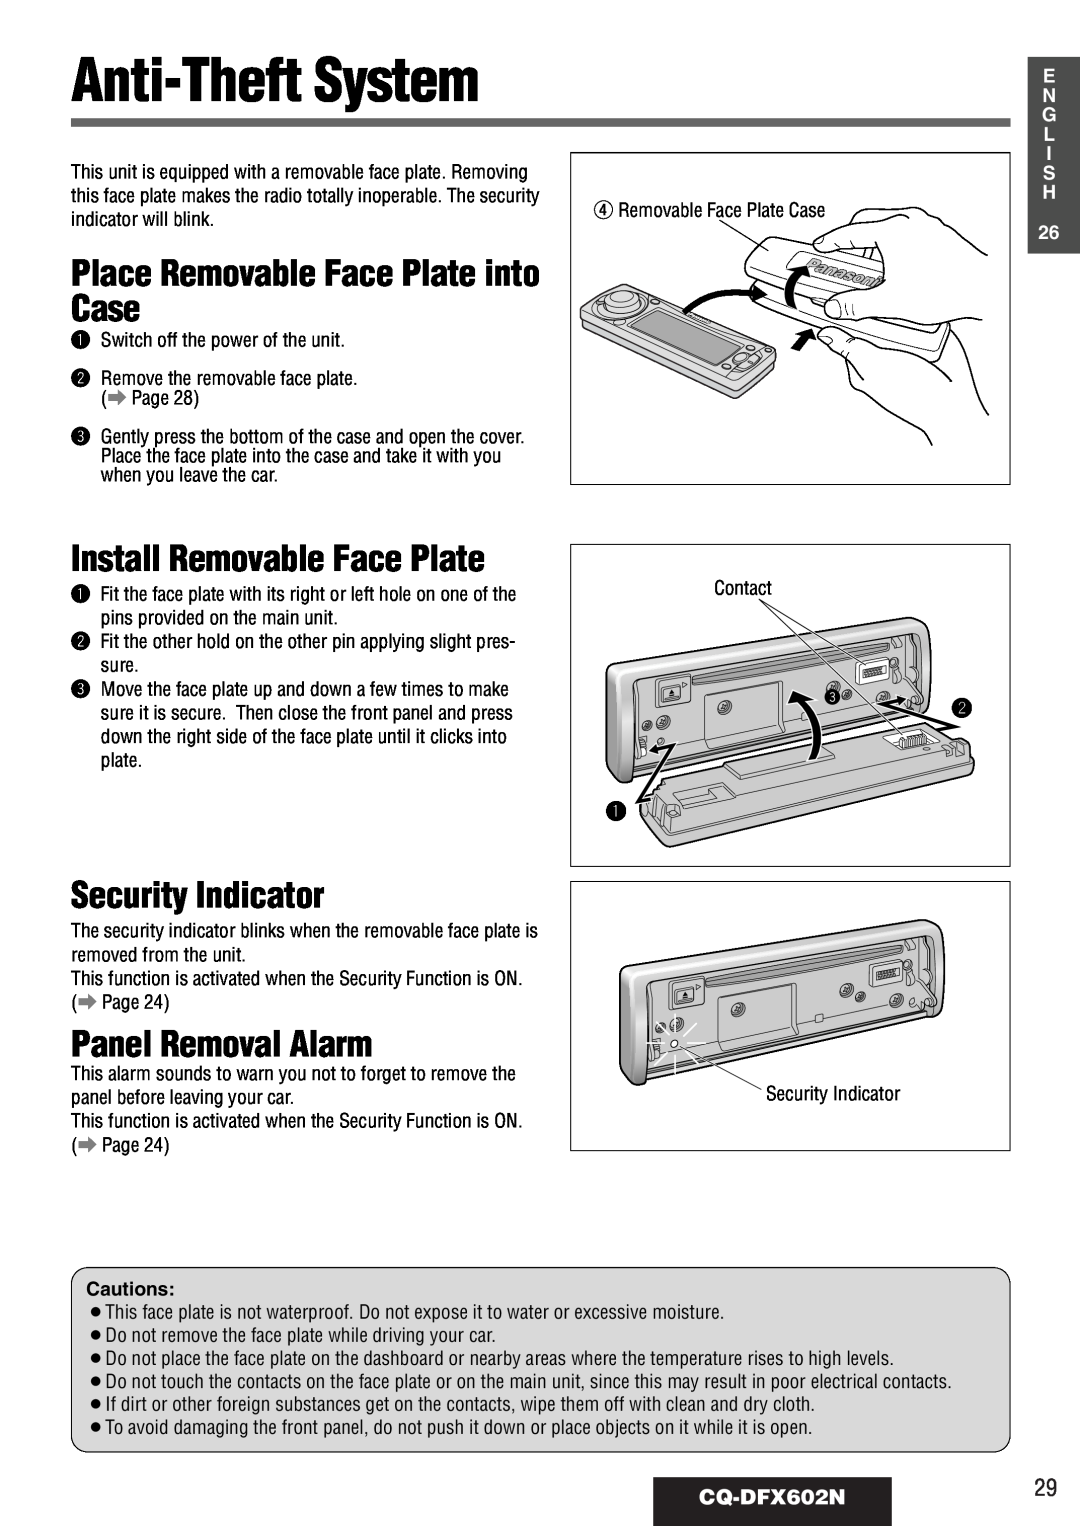 Panasonic manual Anti-TheftSystem, Place Removable Face Plate into Case, Install Removable Face Plate, CQ-DFX602N29, S H 